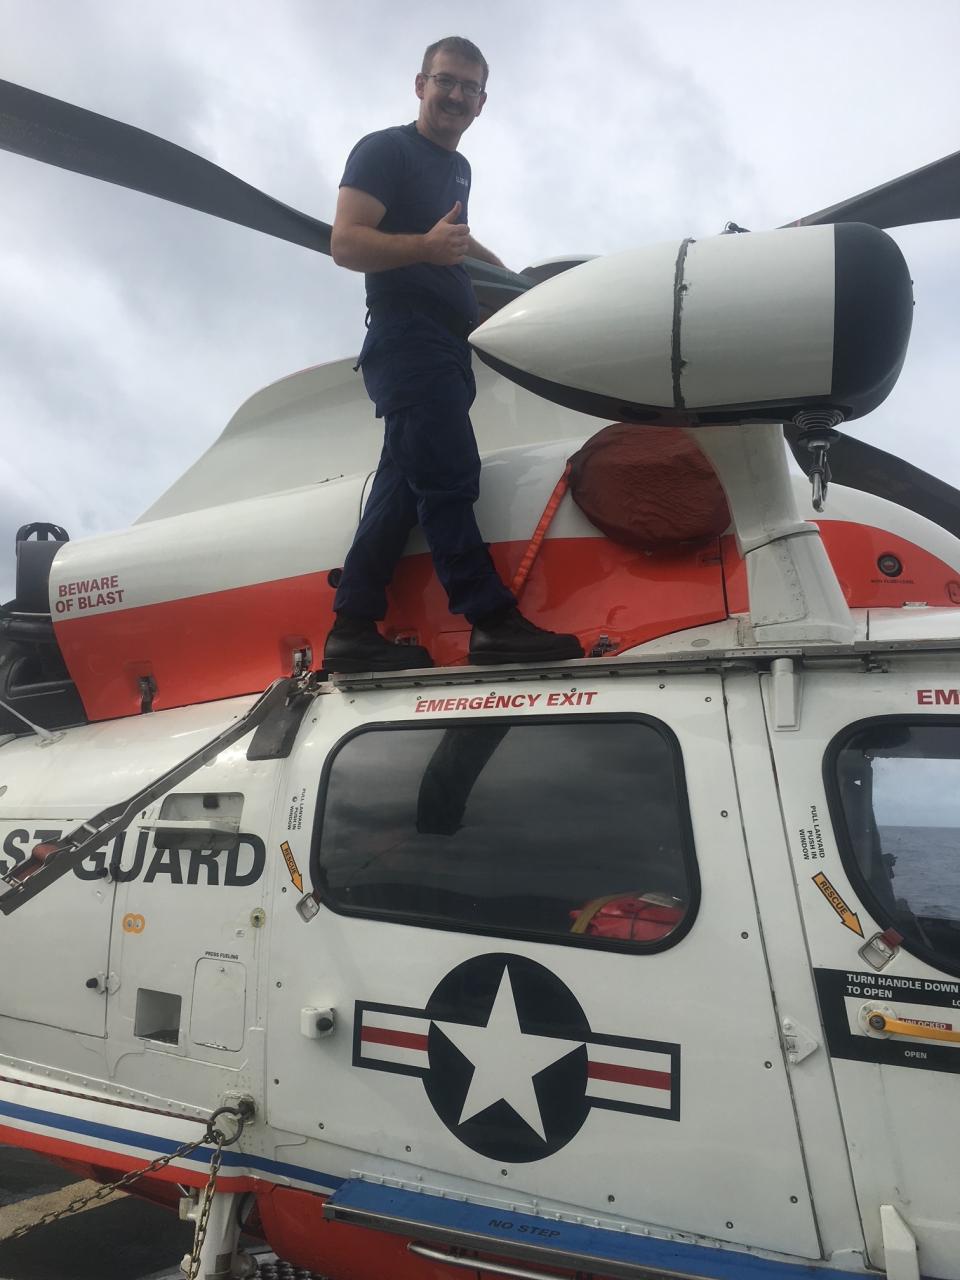 Person standing on top of a parked U.S. Coast Guard helicopter